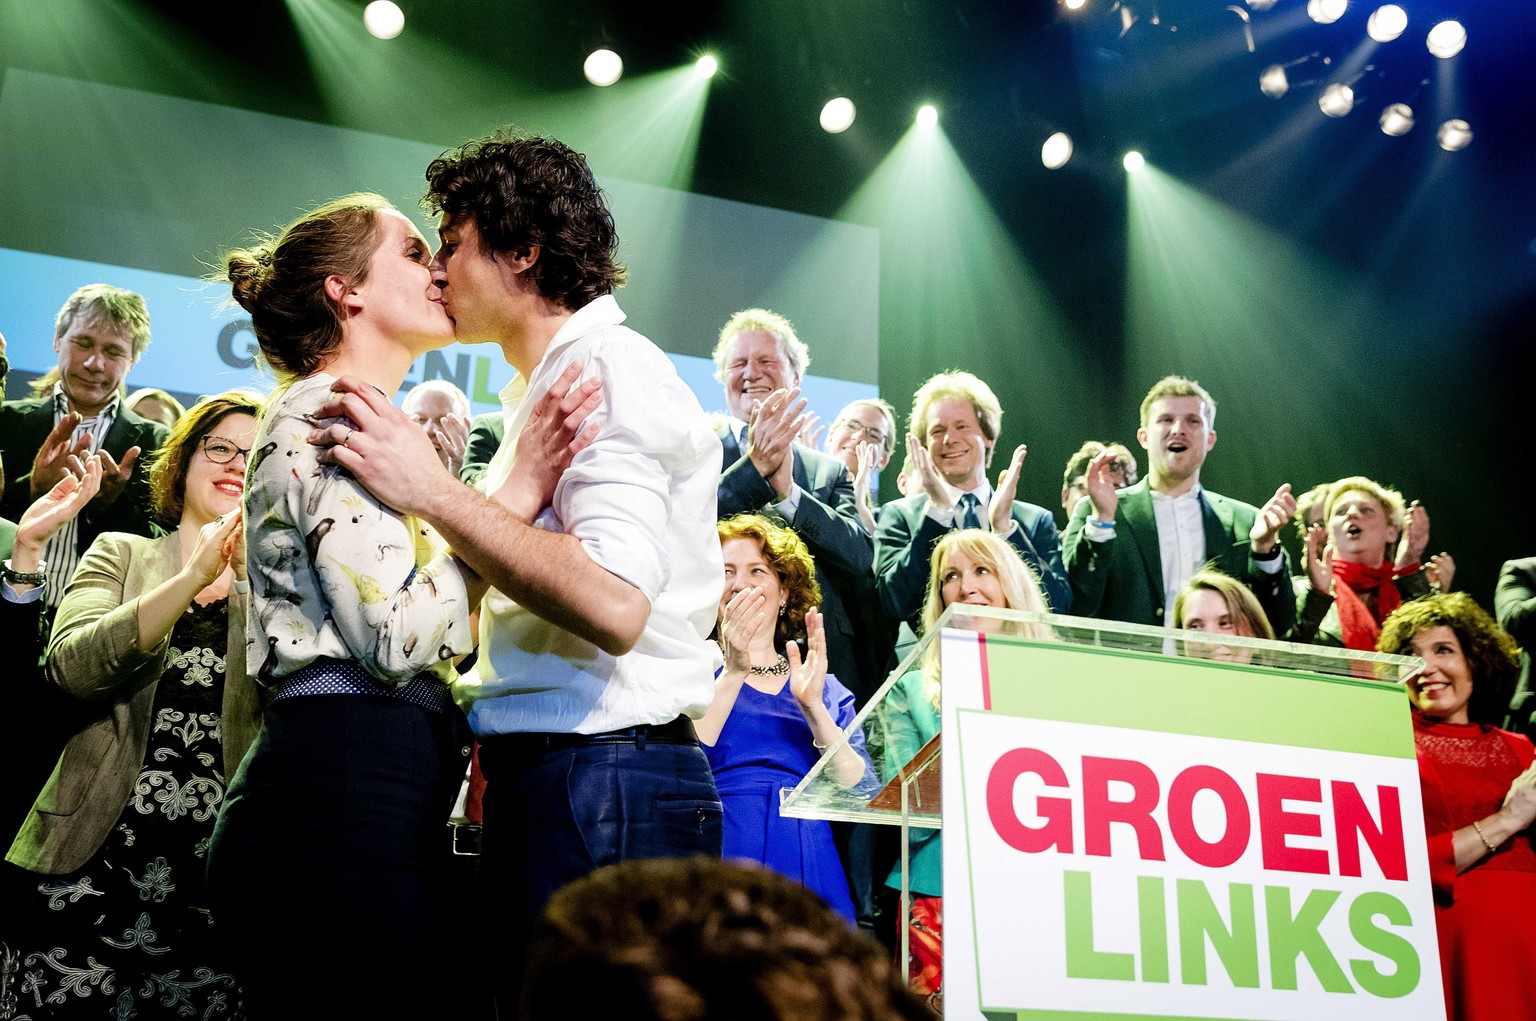 epa05850981 Jesse Klaver of GroenLinks party kisses his wife during election night in Amsterdam, The Netherlands, 15 March 2017. EPA/ROBIN VAN LONKHUIJSEN